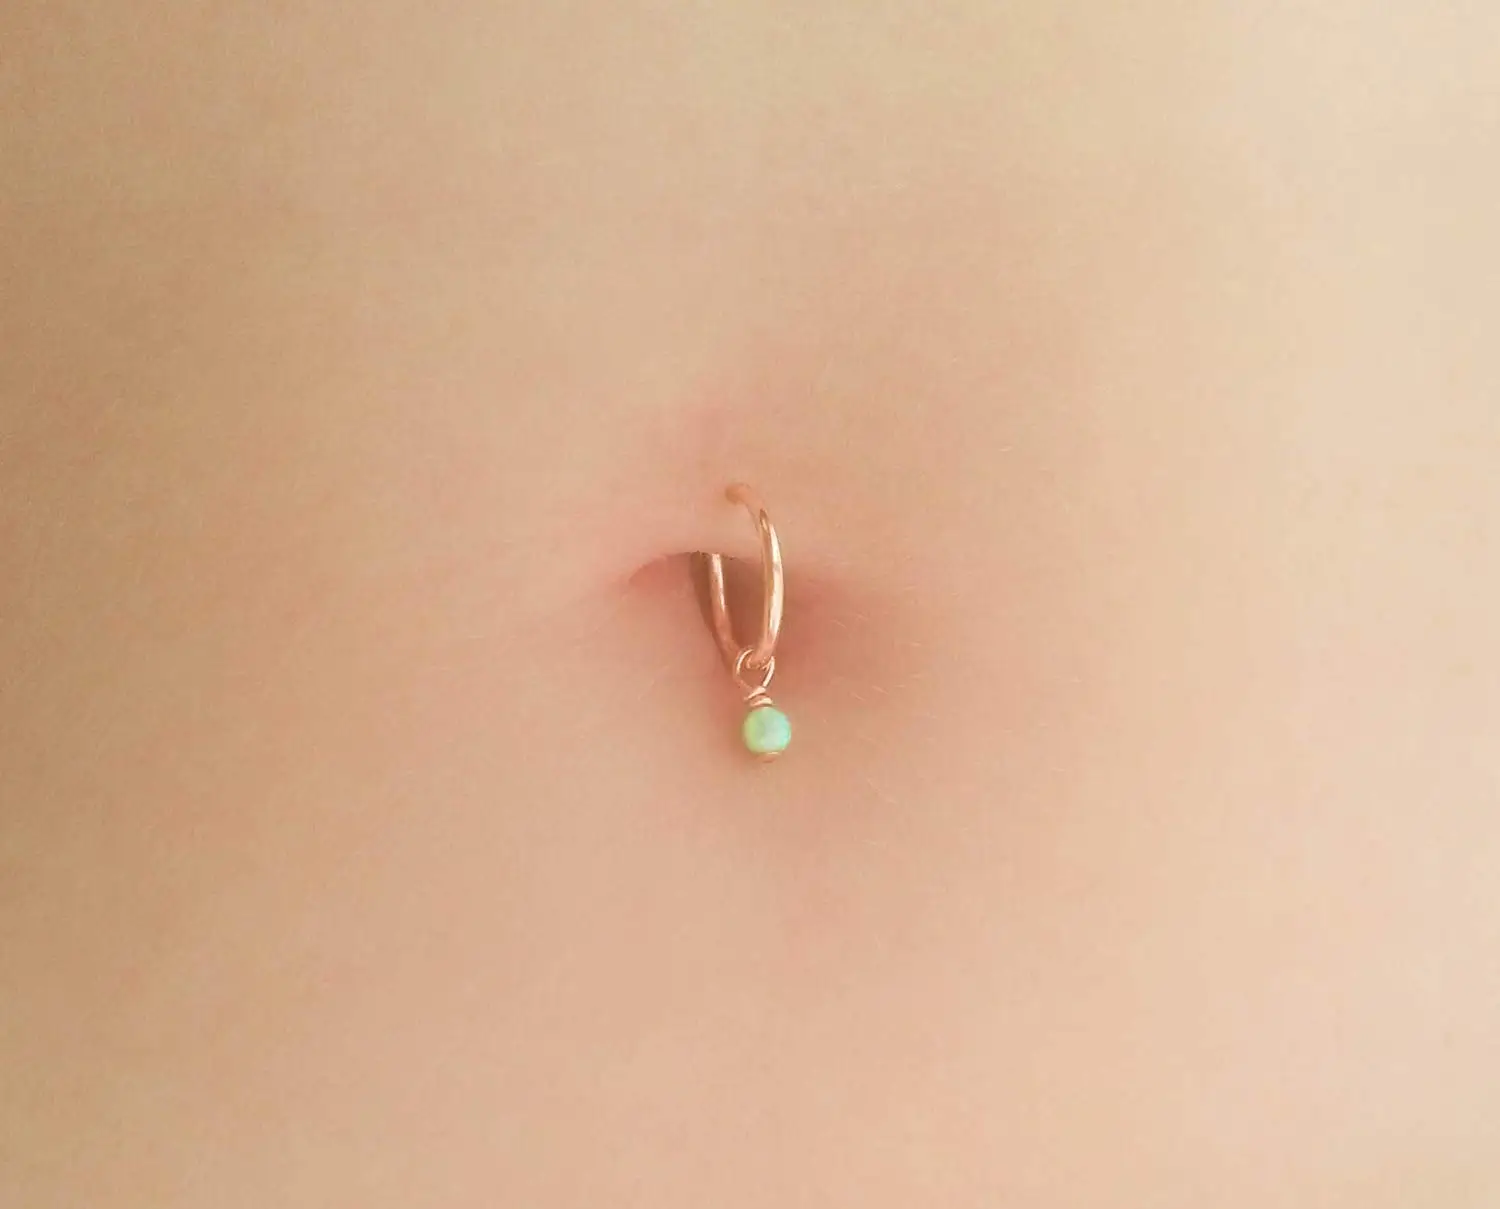 Intimation Fire Opal White Rhinestone Belly Button Navel Ring Body Jewelry Fits in Navel 14ga Cute Belly Ring